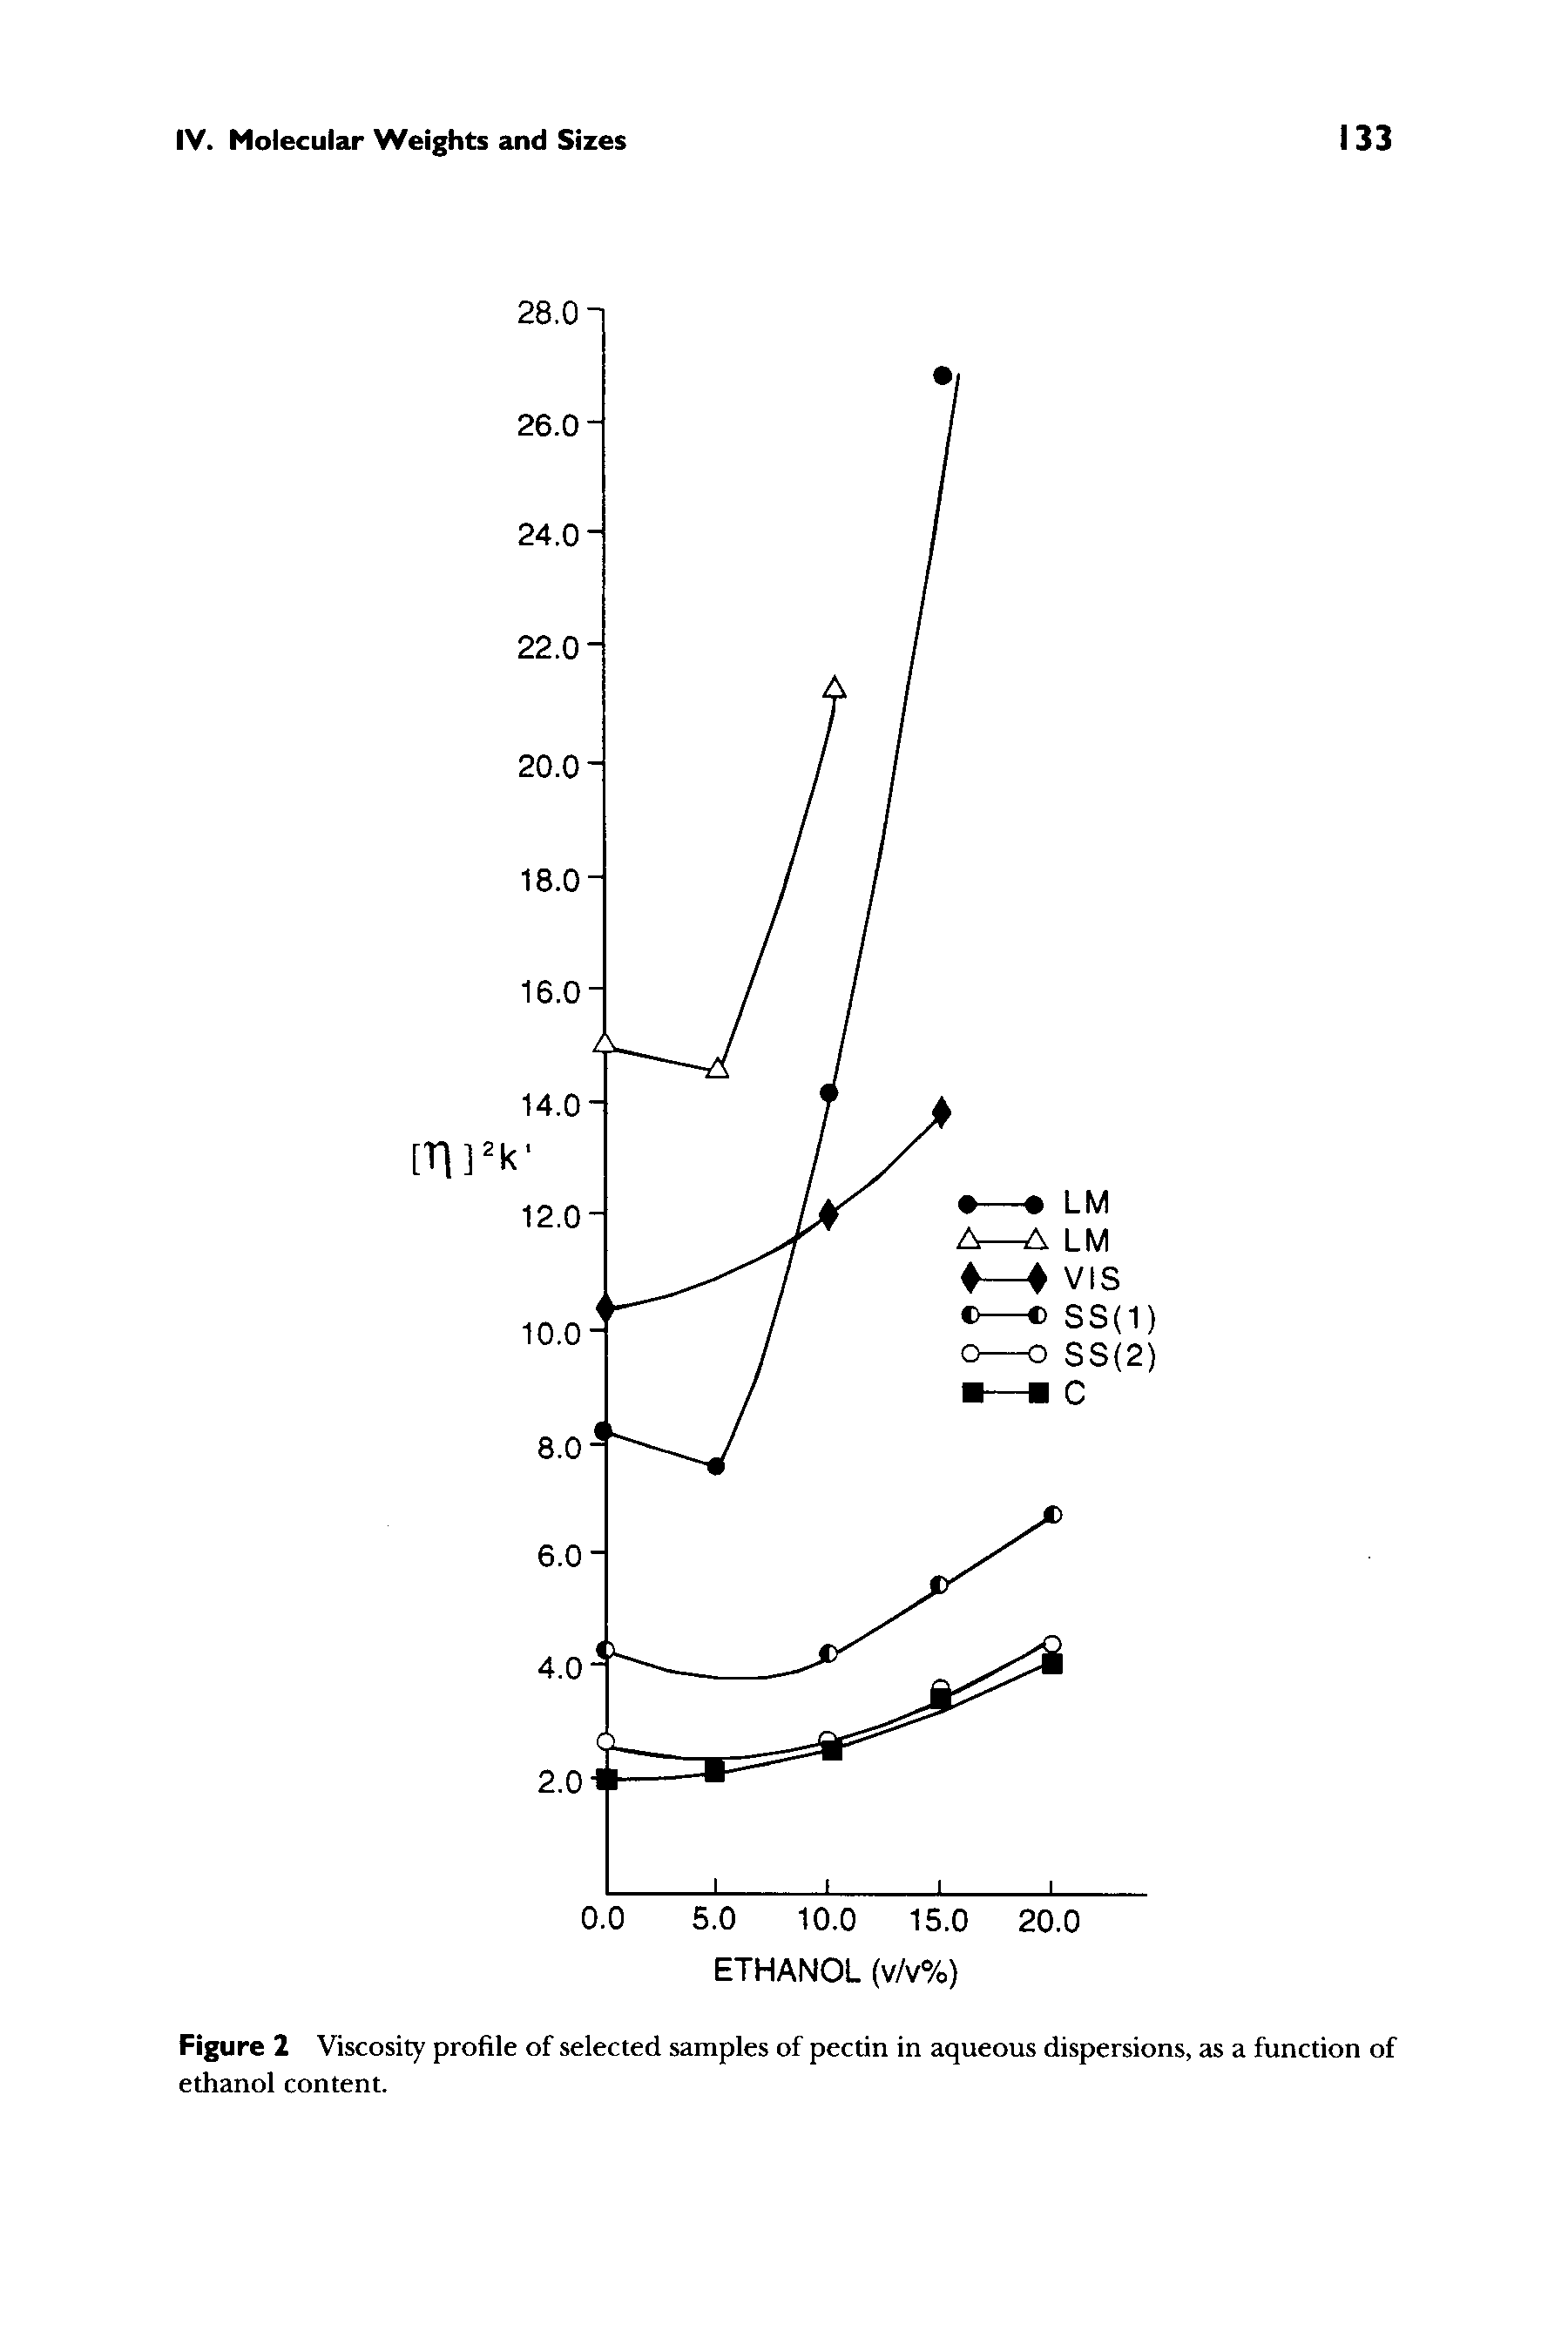 Figure 2 Viscosity profile of selected samples of pectin in aqueous dispersions, as a function of ethanol content.